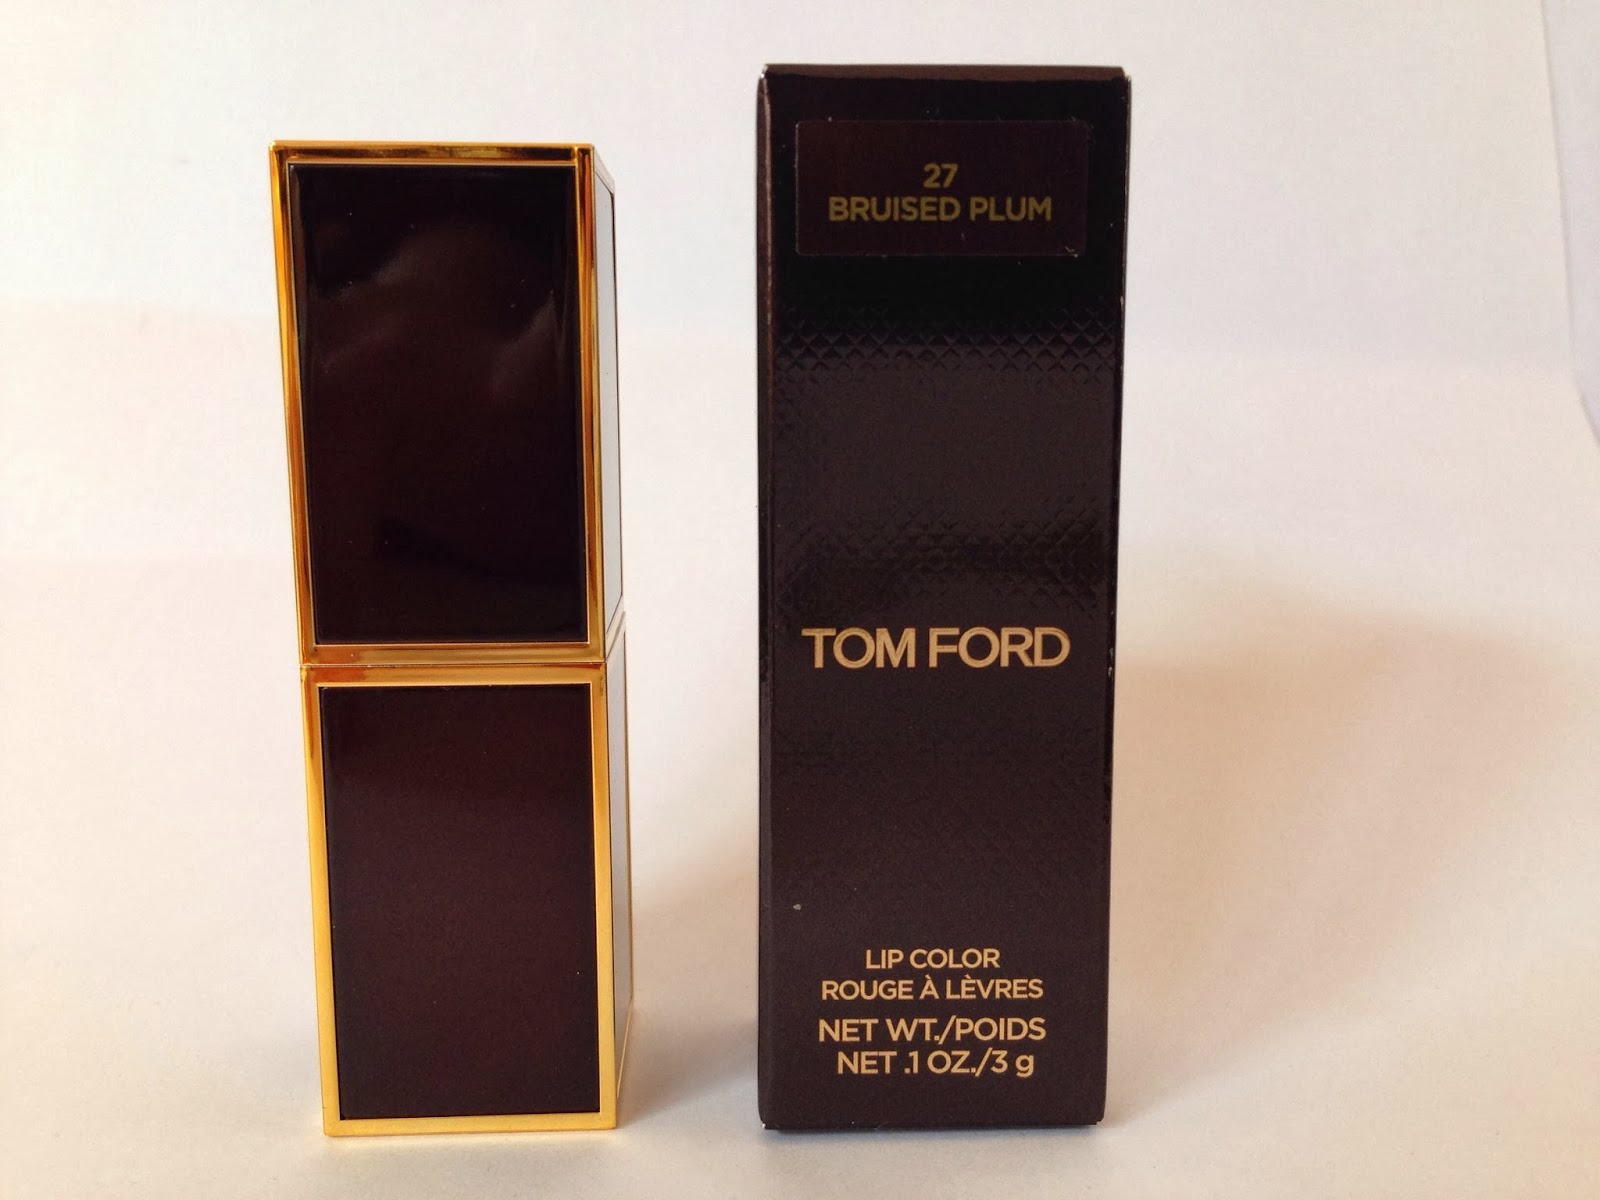 THISISFEB12: Review: Tom Ford Bruised Plum Lip Color